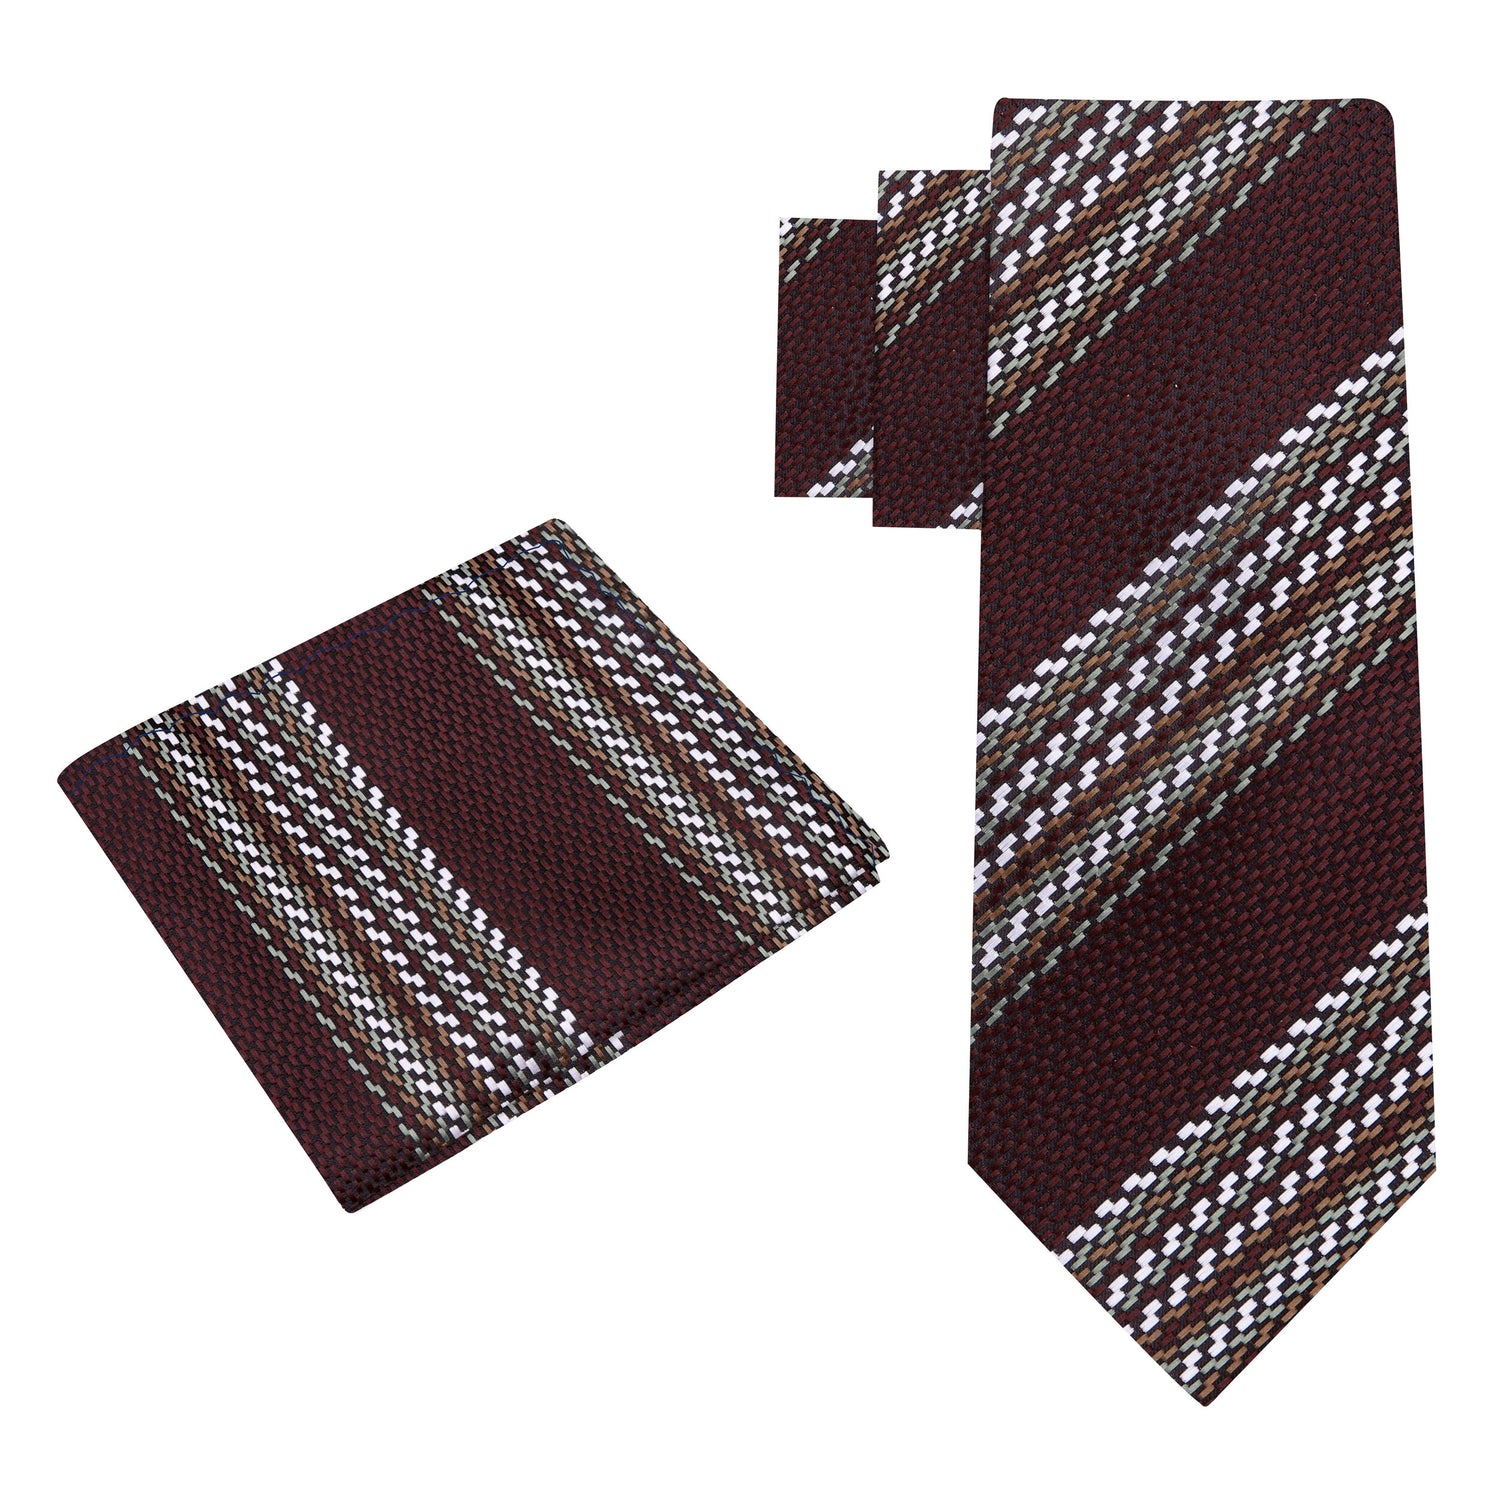 Alt View: Brown, Olive Geometric Tie and Pocket Square